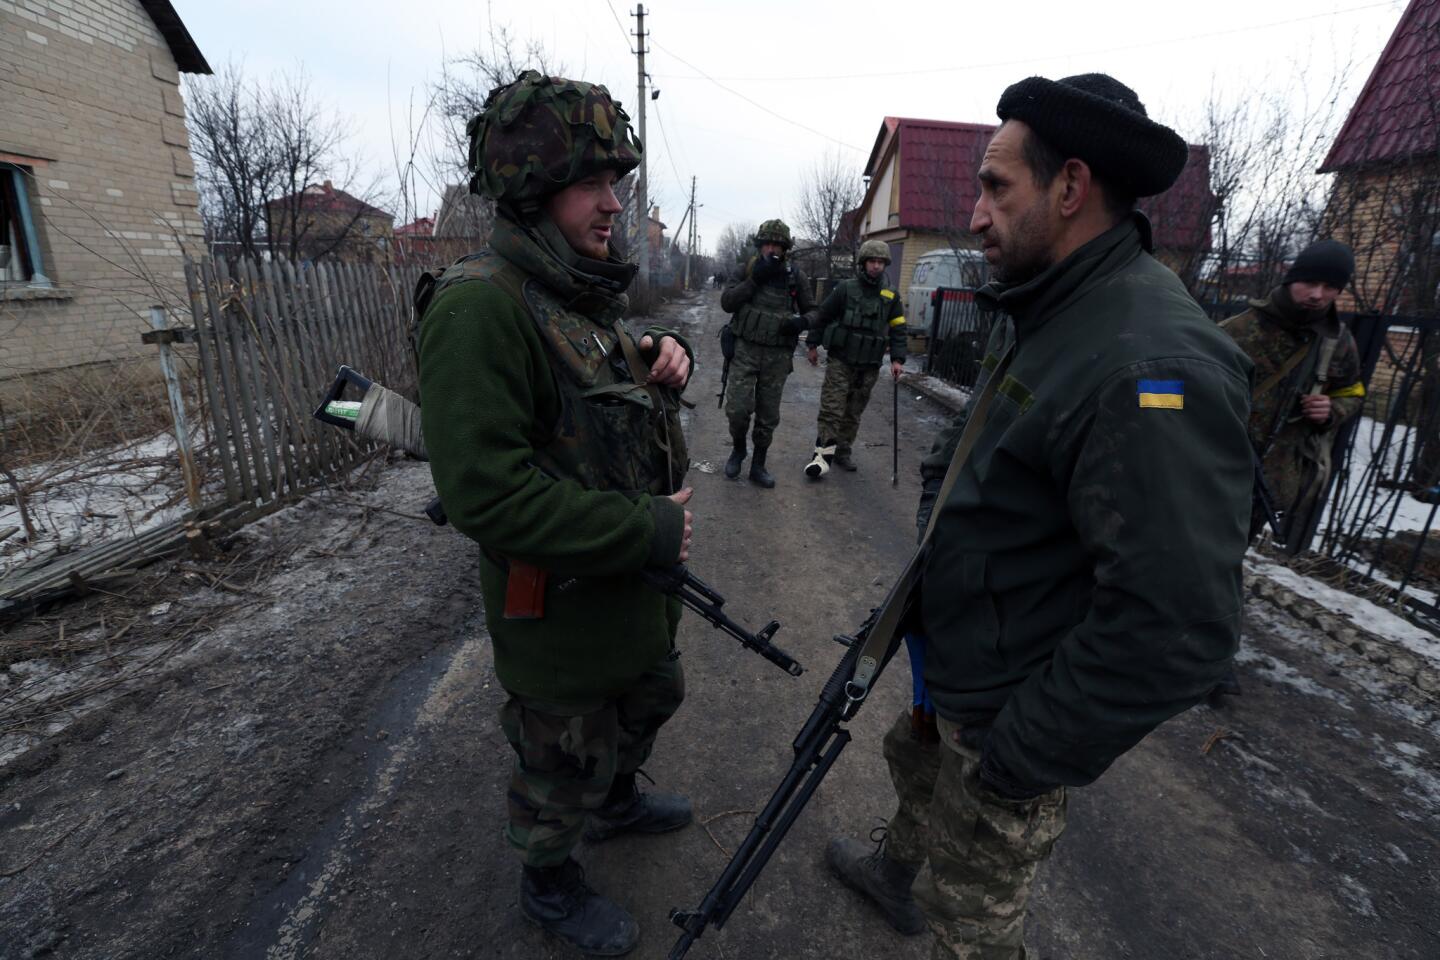 On the outskirts of Donetsk, Maxim Bugel, left, a Ukrainian platoon commander, talks to a survivor of the airport siege.